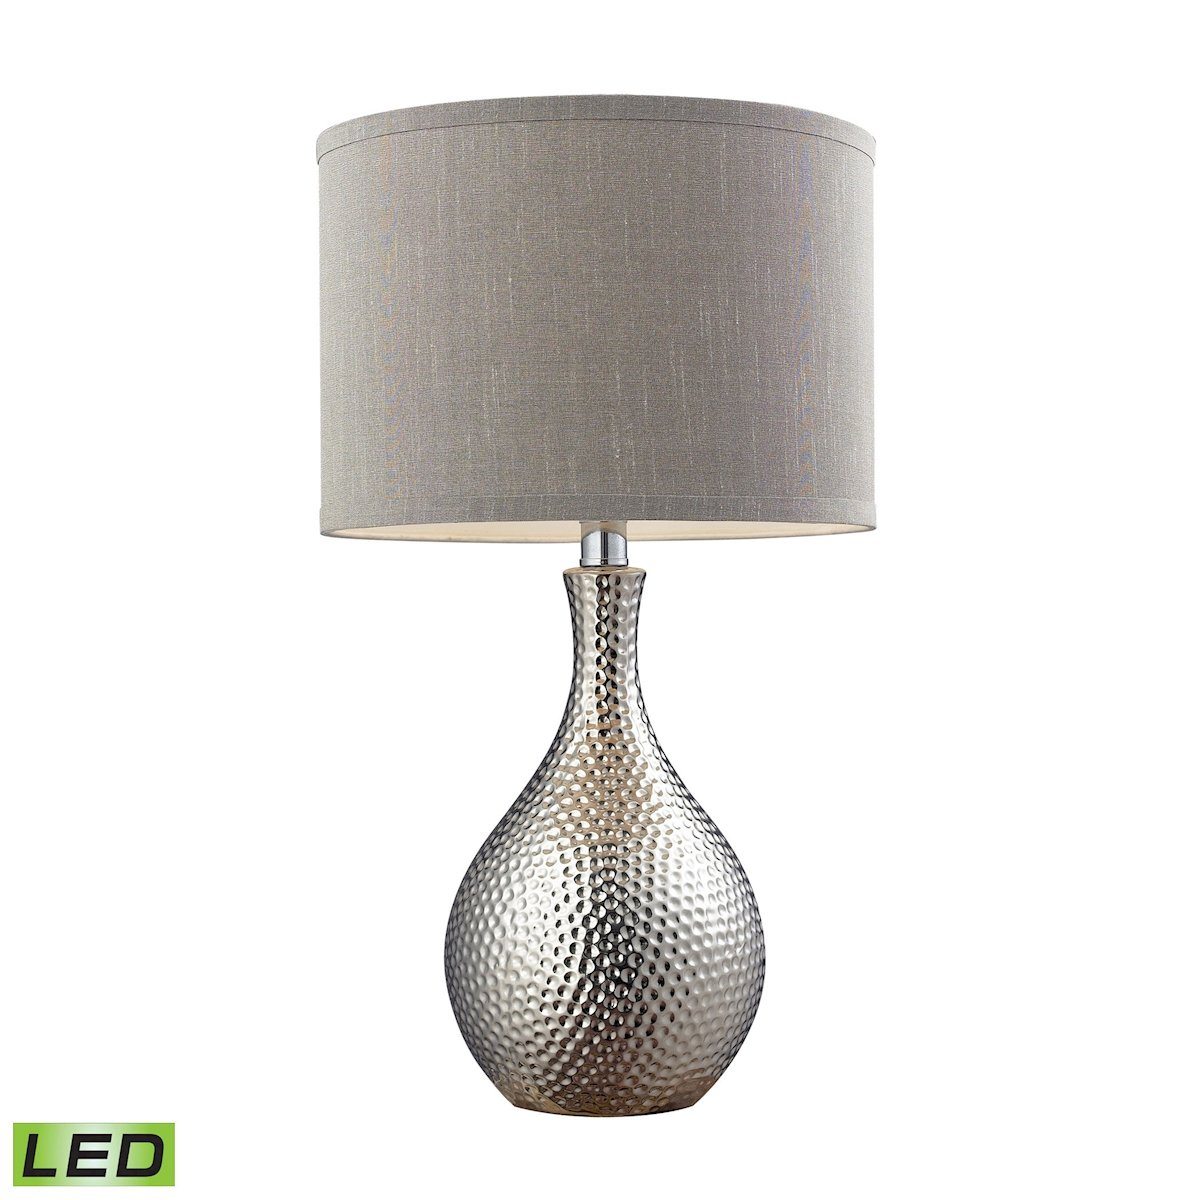 Hammered Chrome 22"h LED Table Lamp With Grey Shade Lamps Dimond Lighting 